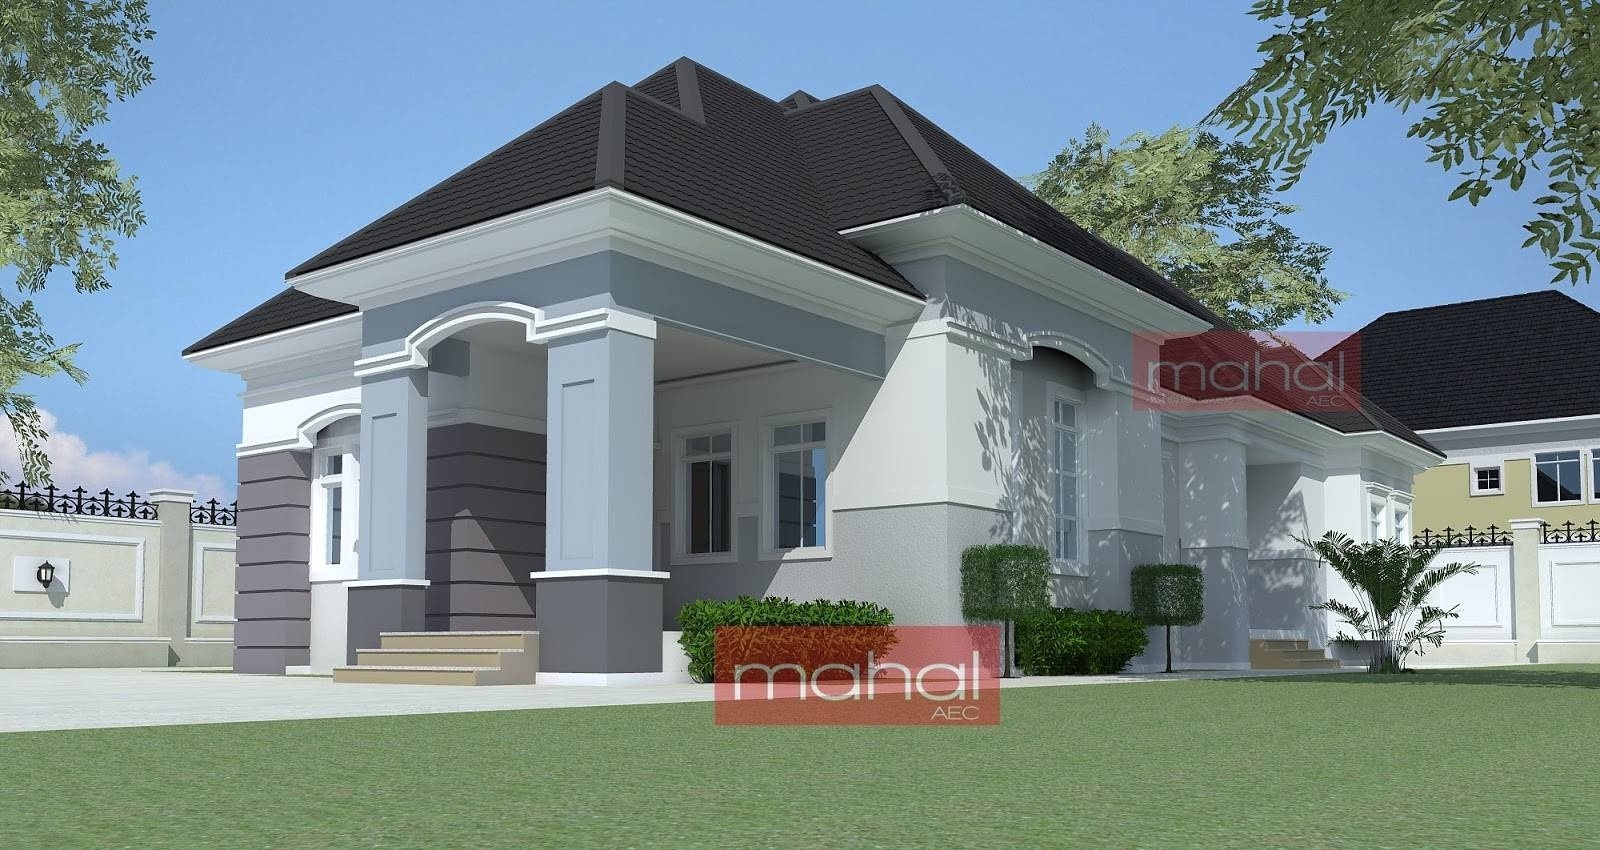 Gorgeous bungalow home plans nigeria further house house plans | #69220 throughout splendid 5 bedroom bungalow house plans in nigeria